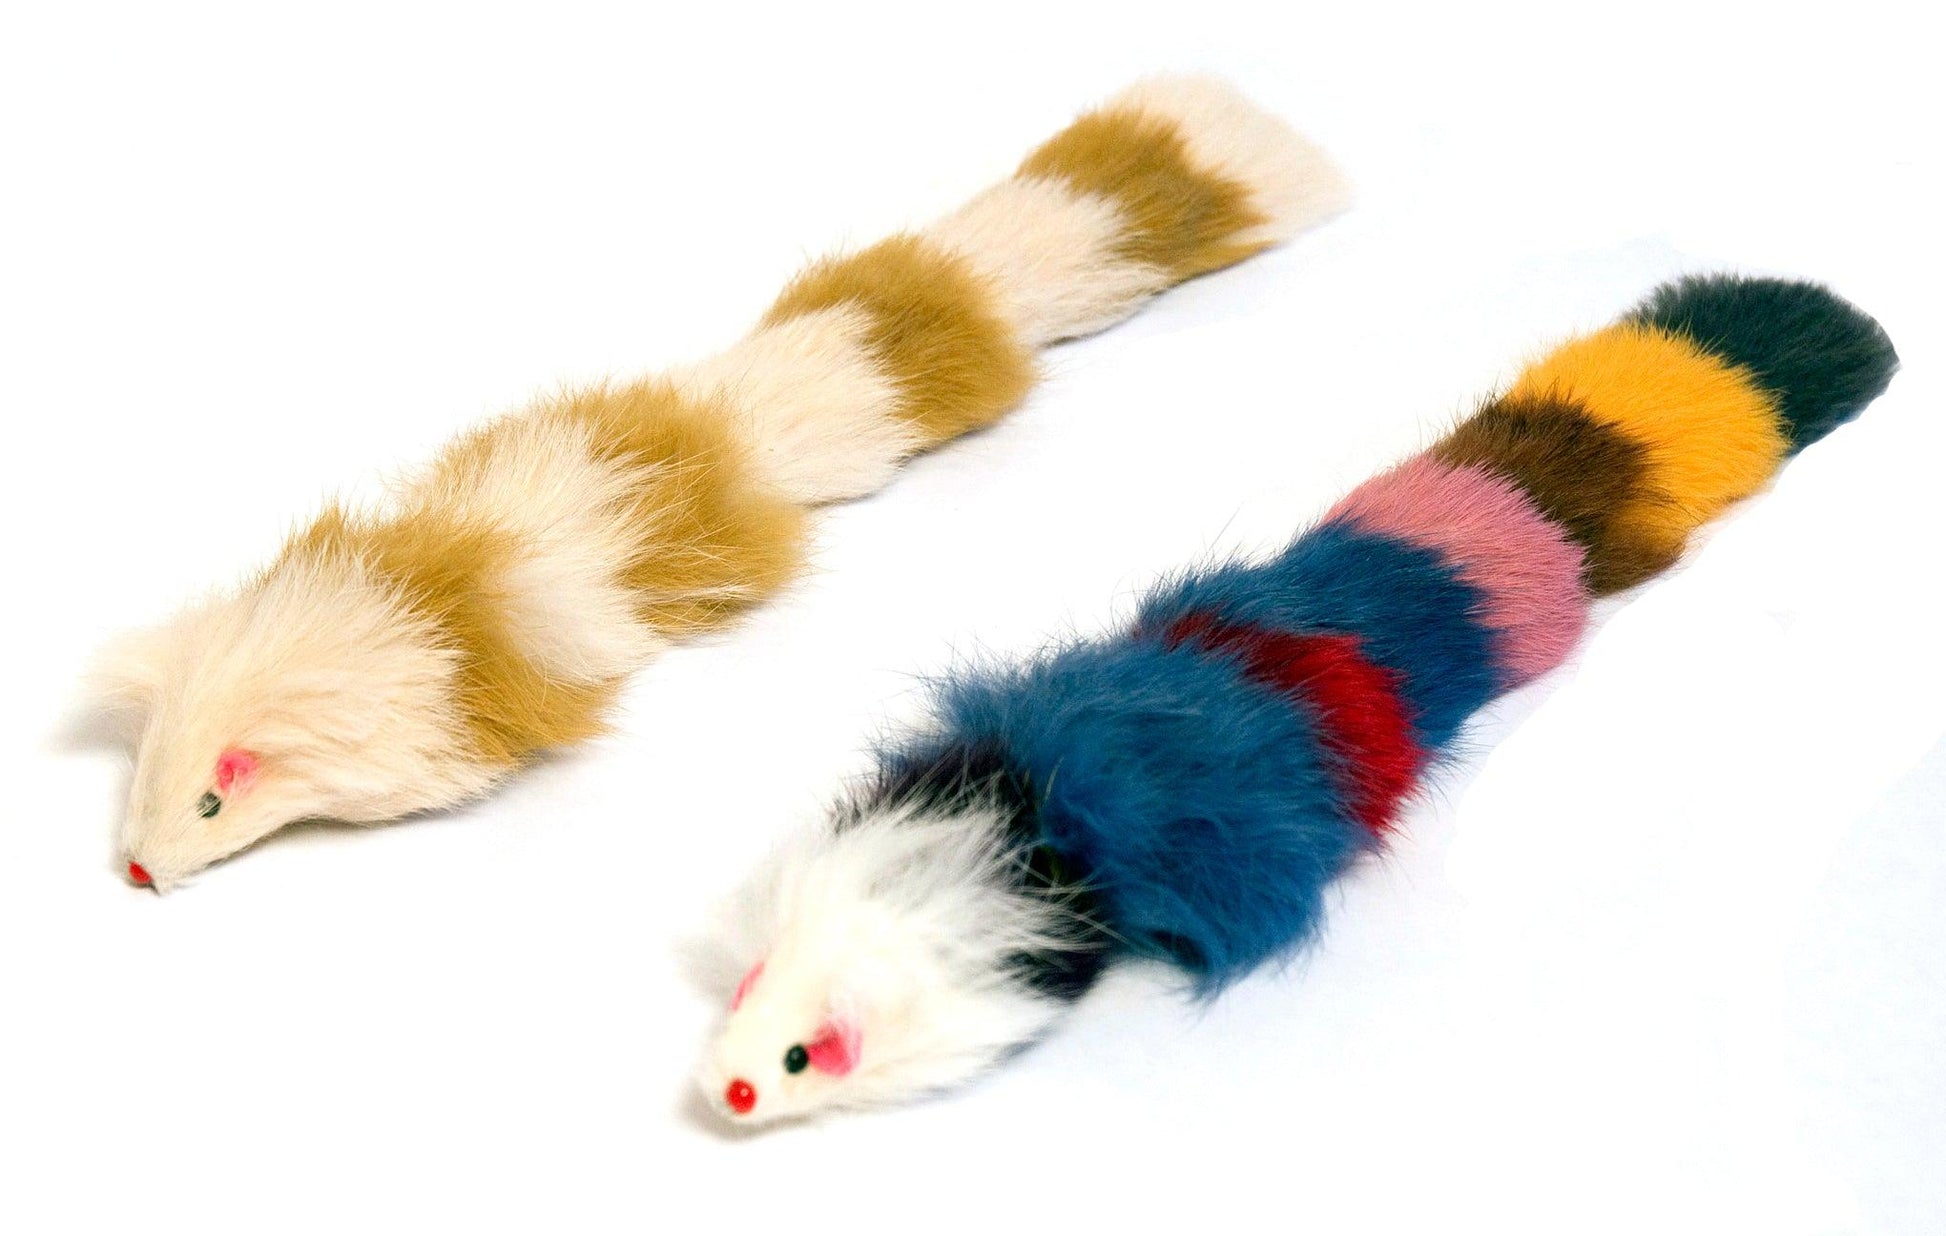 Set of Two Fur Weasel Toys (one Brown/White and one Multi-colored) - Iconic Pet, LLC